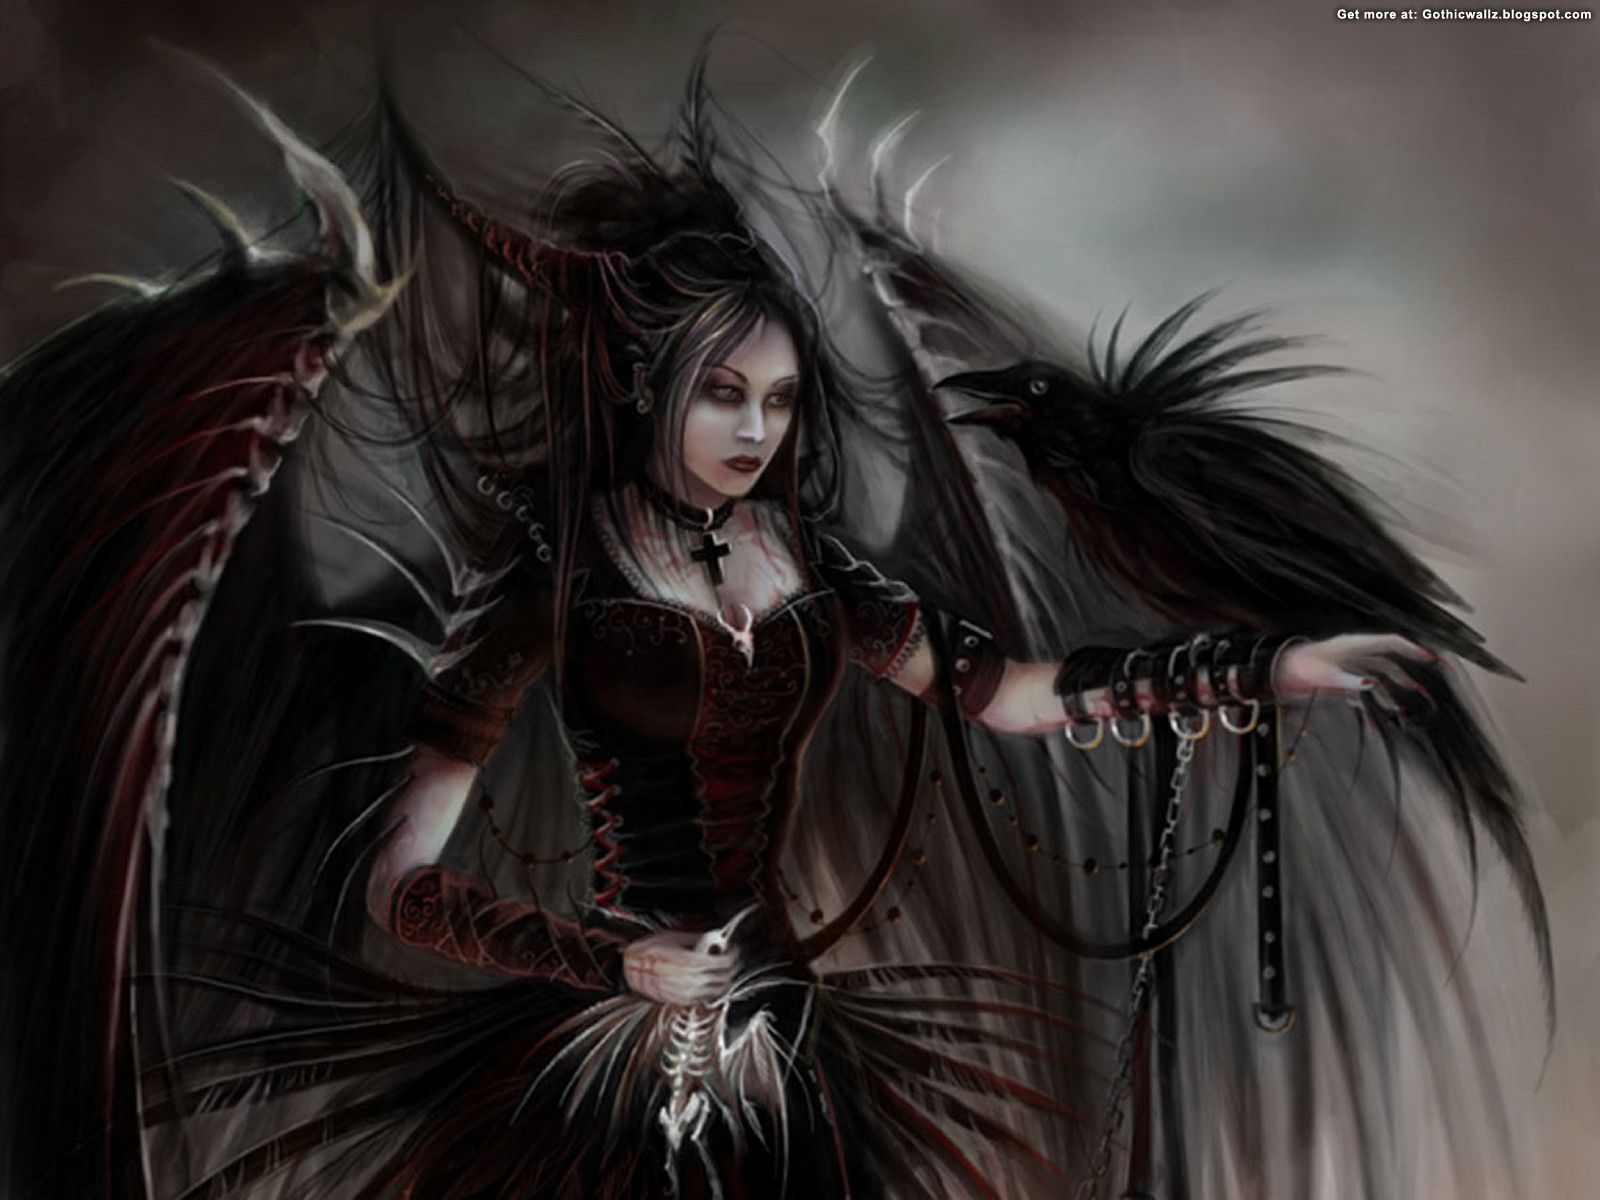 Pink Gothic Angel Wallpapers